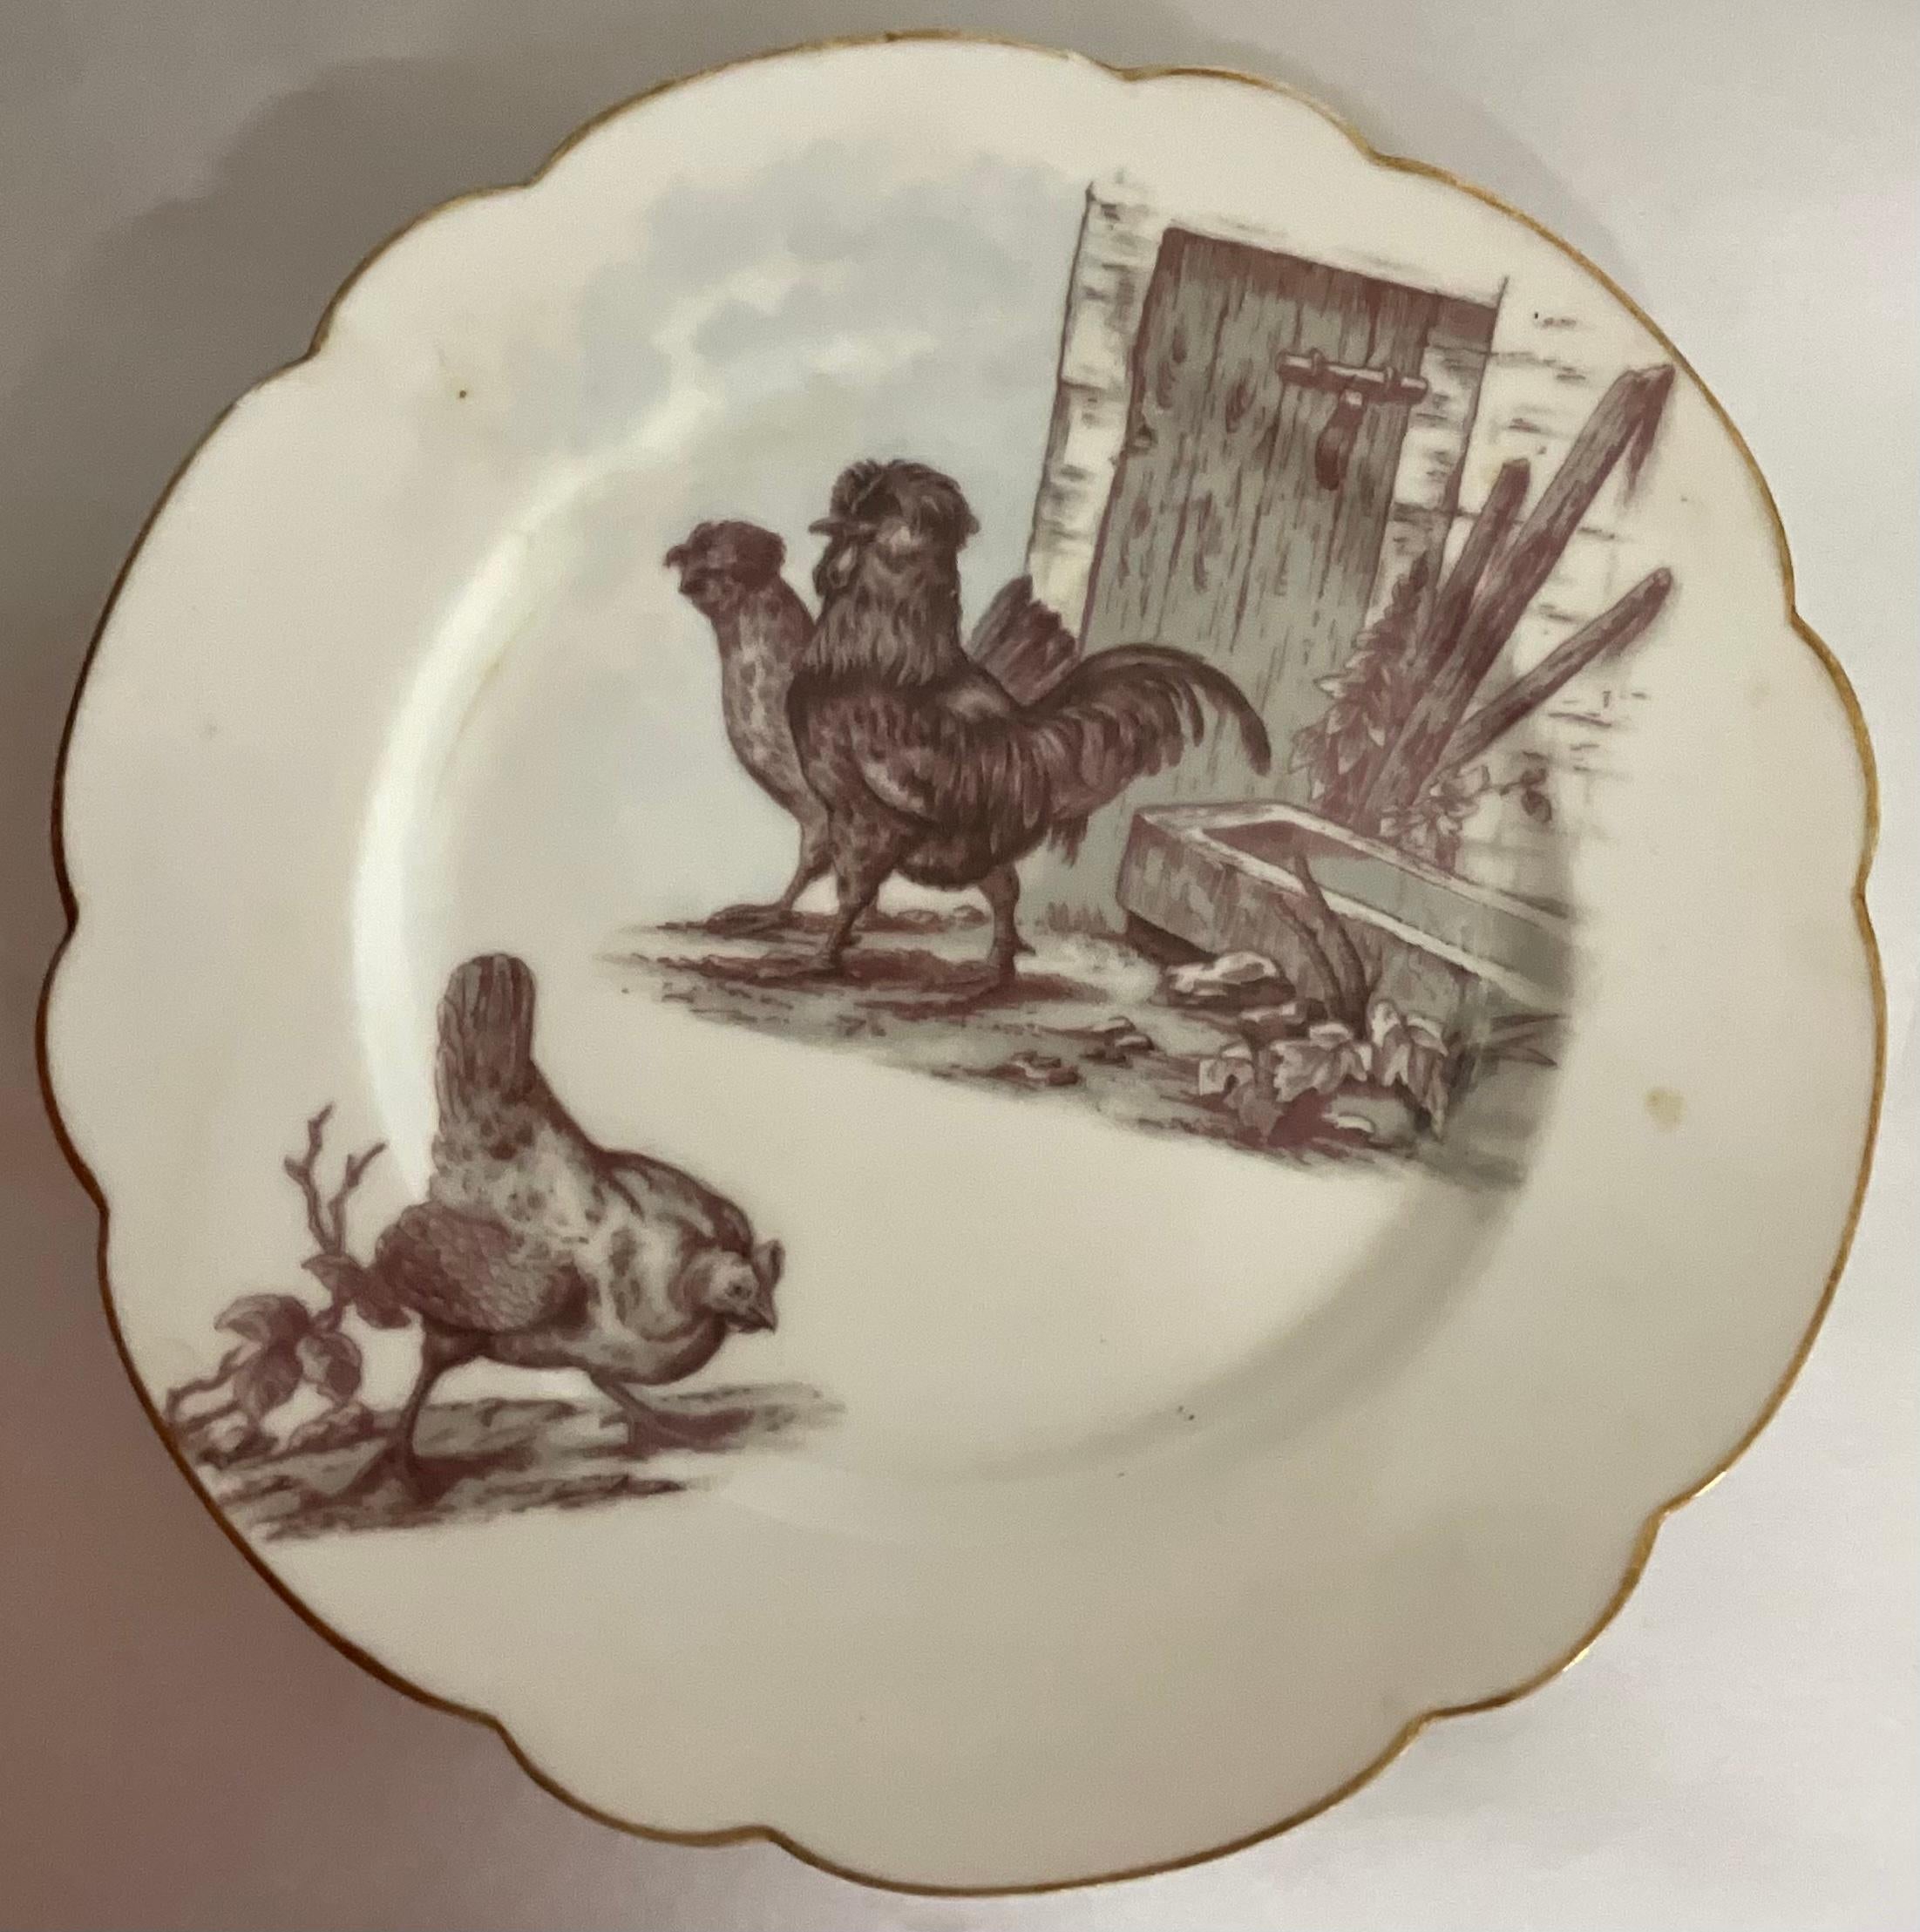 This such a sweet set of 19th century Limoges dessert plates. They have pastoral themes ranging from rabbits to turtles. Two are replicated. Would be lovely in a variety of setting, like a nursery or kitchen or entry!